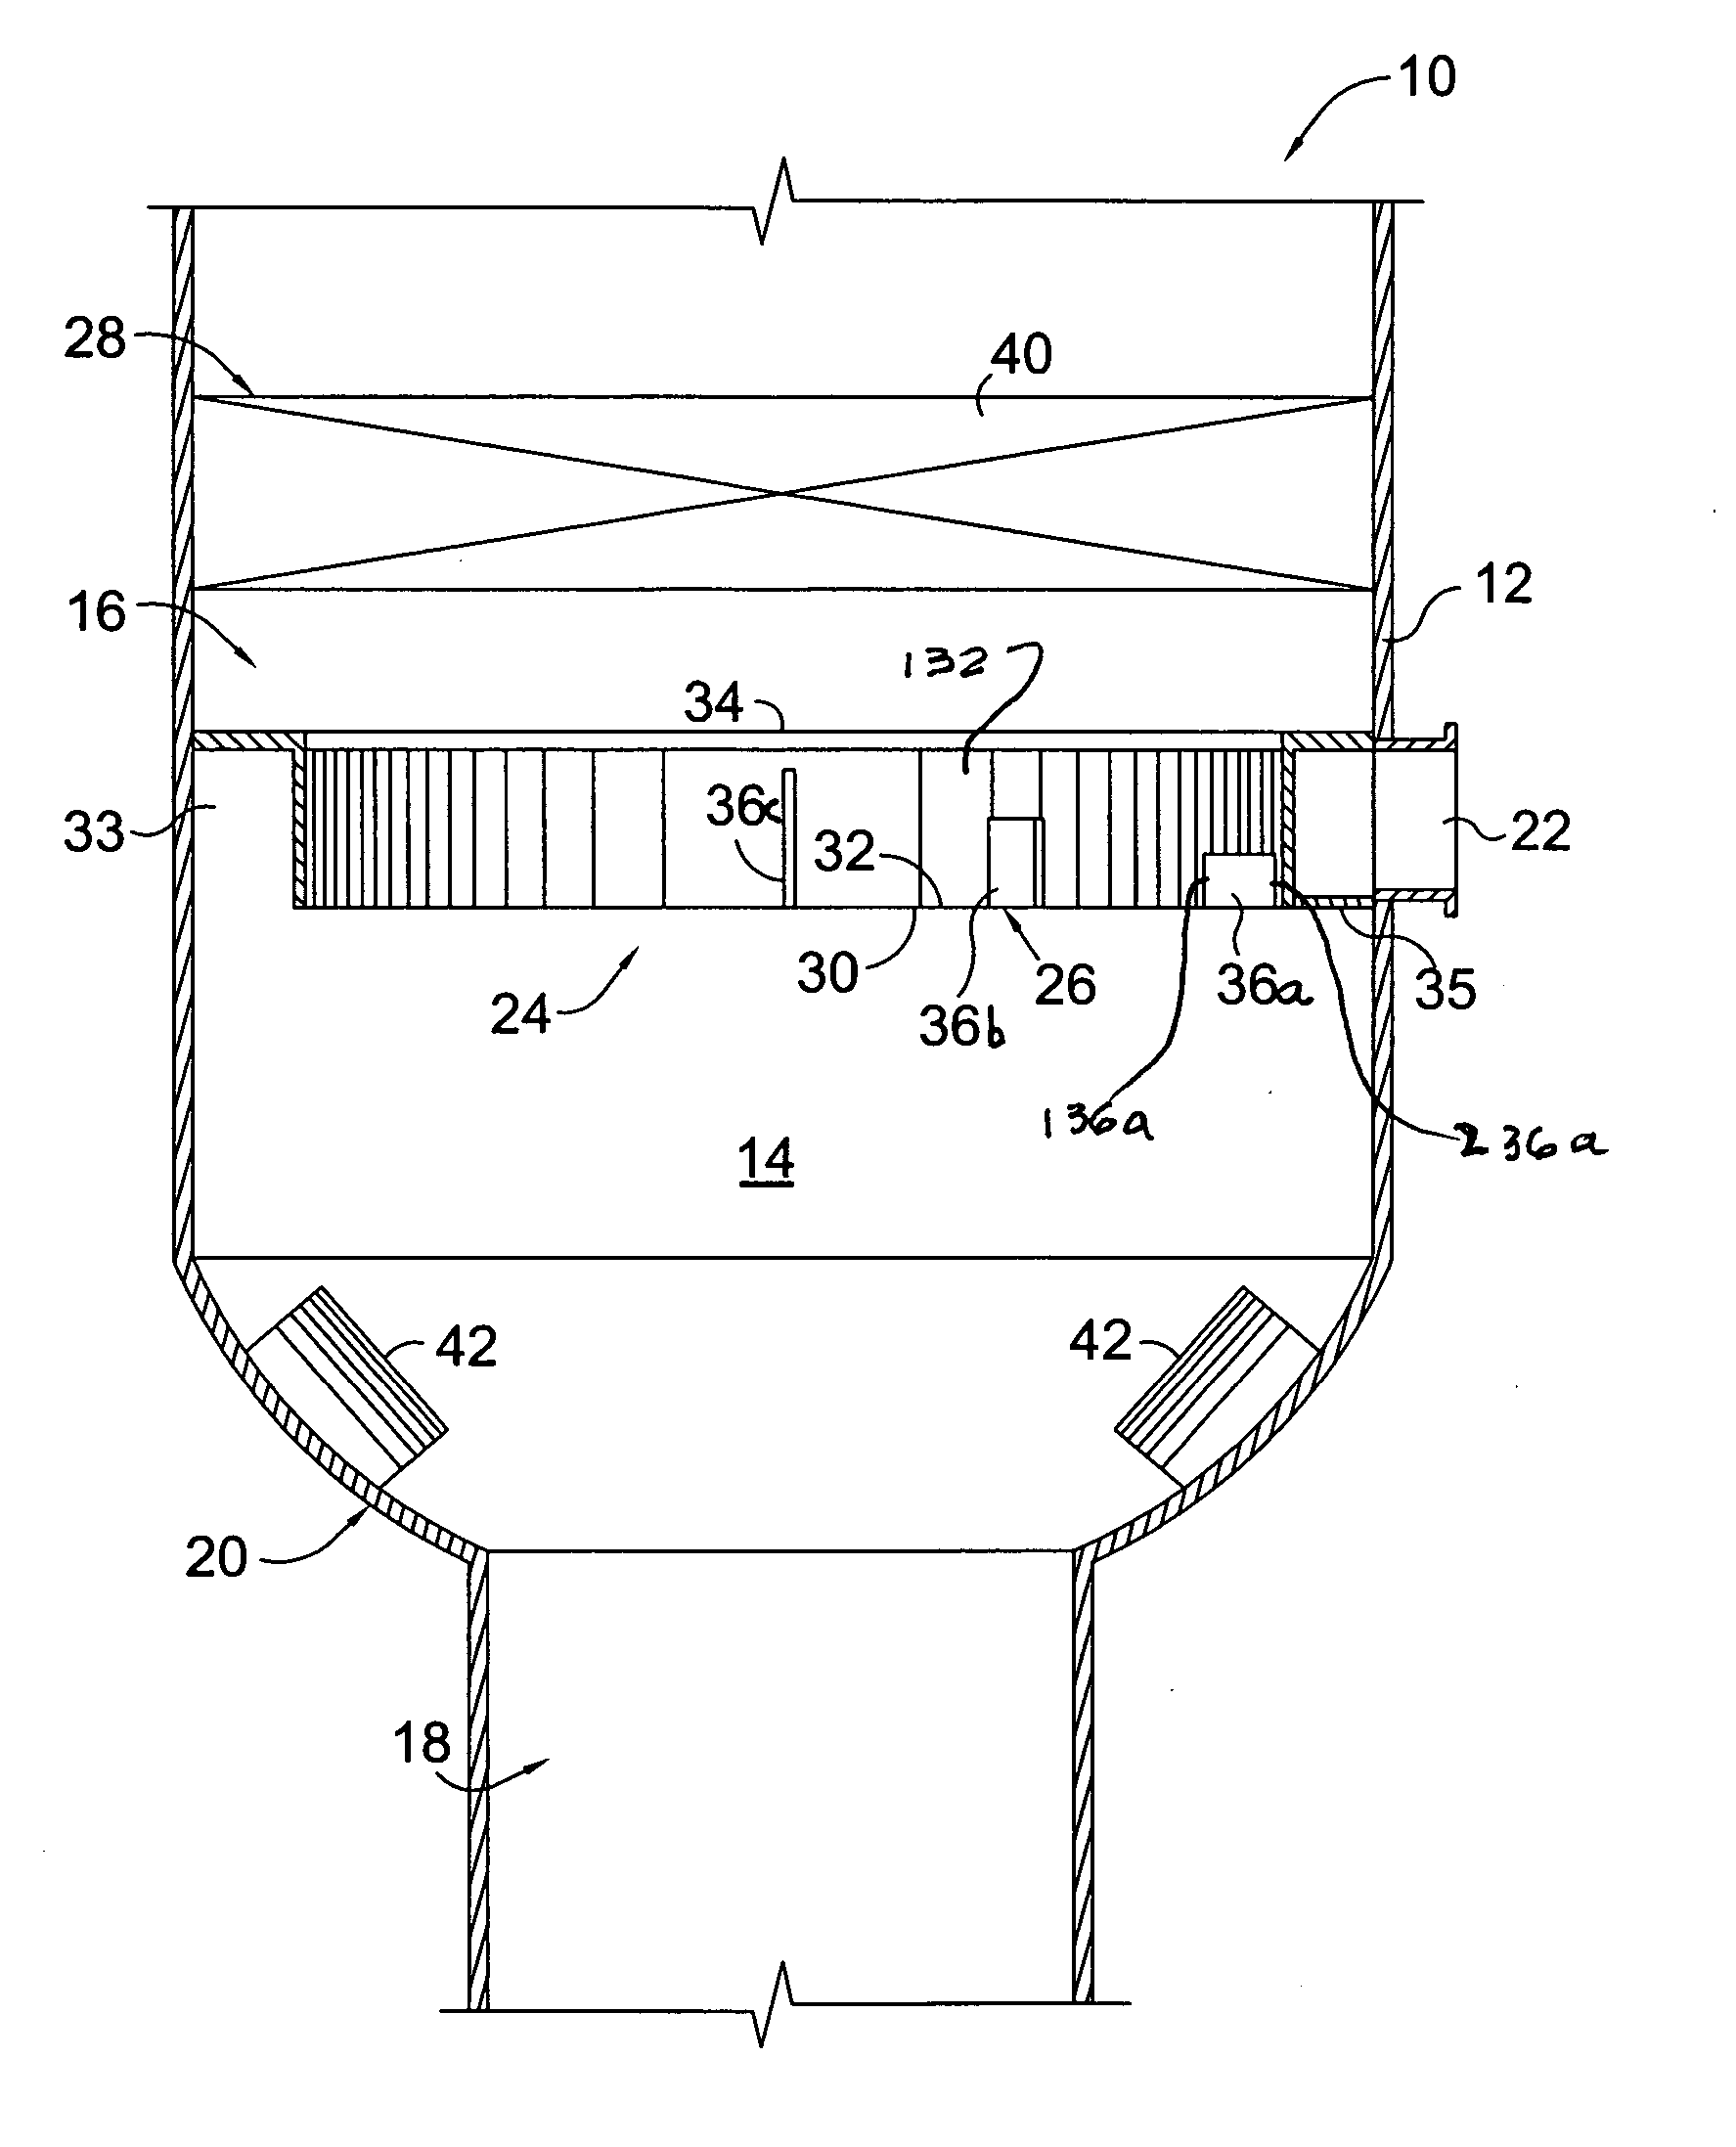 Method and apparatus for facilitating more uniform vapor distribution in mass transfer and heat exchange columns